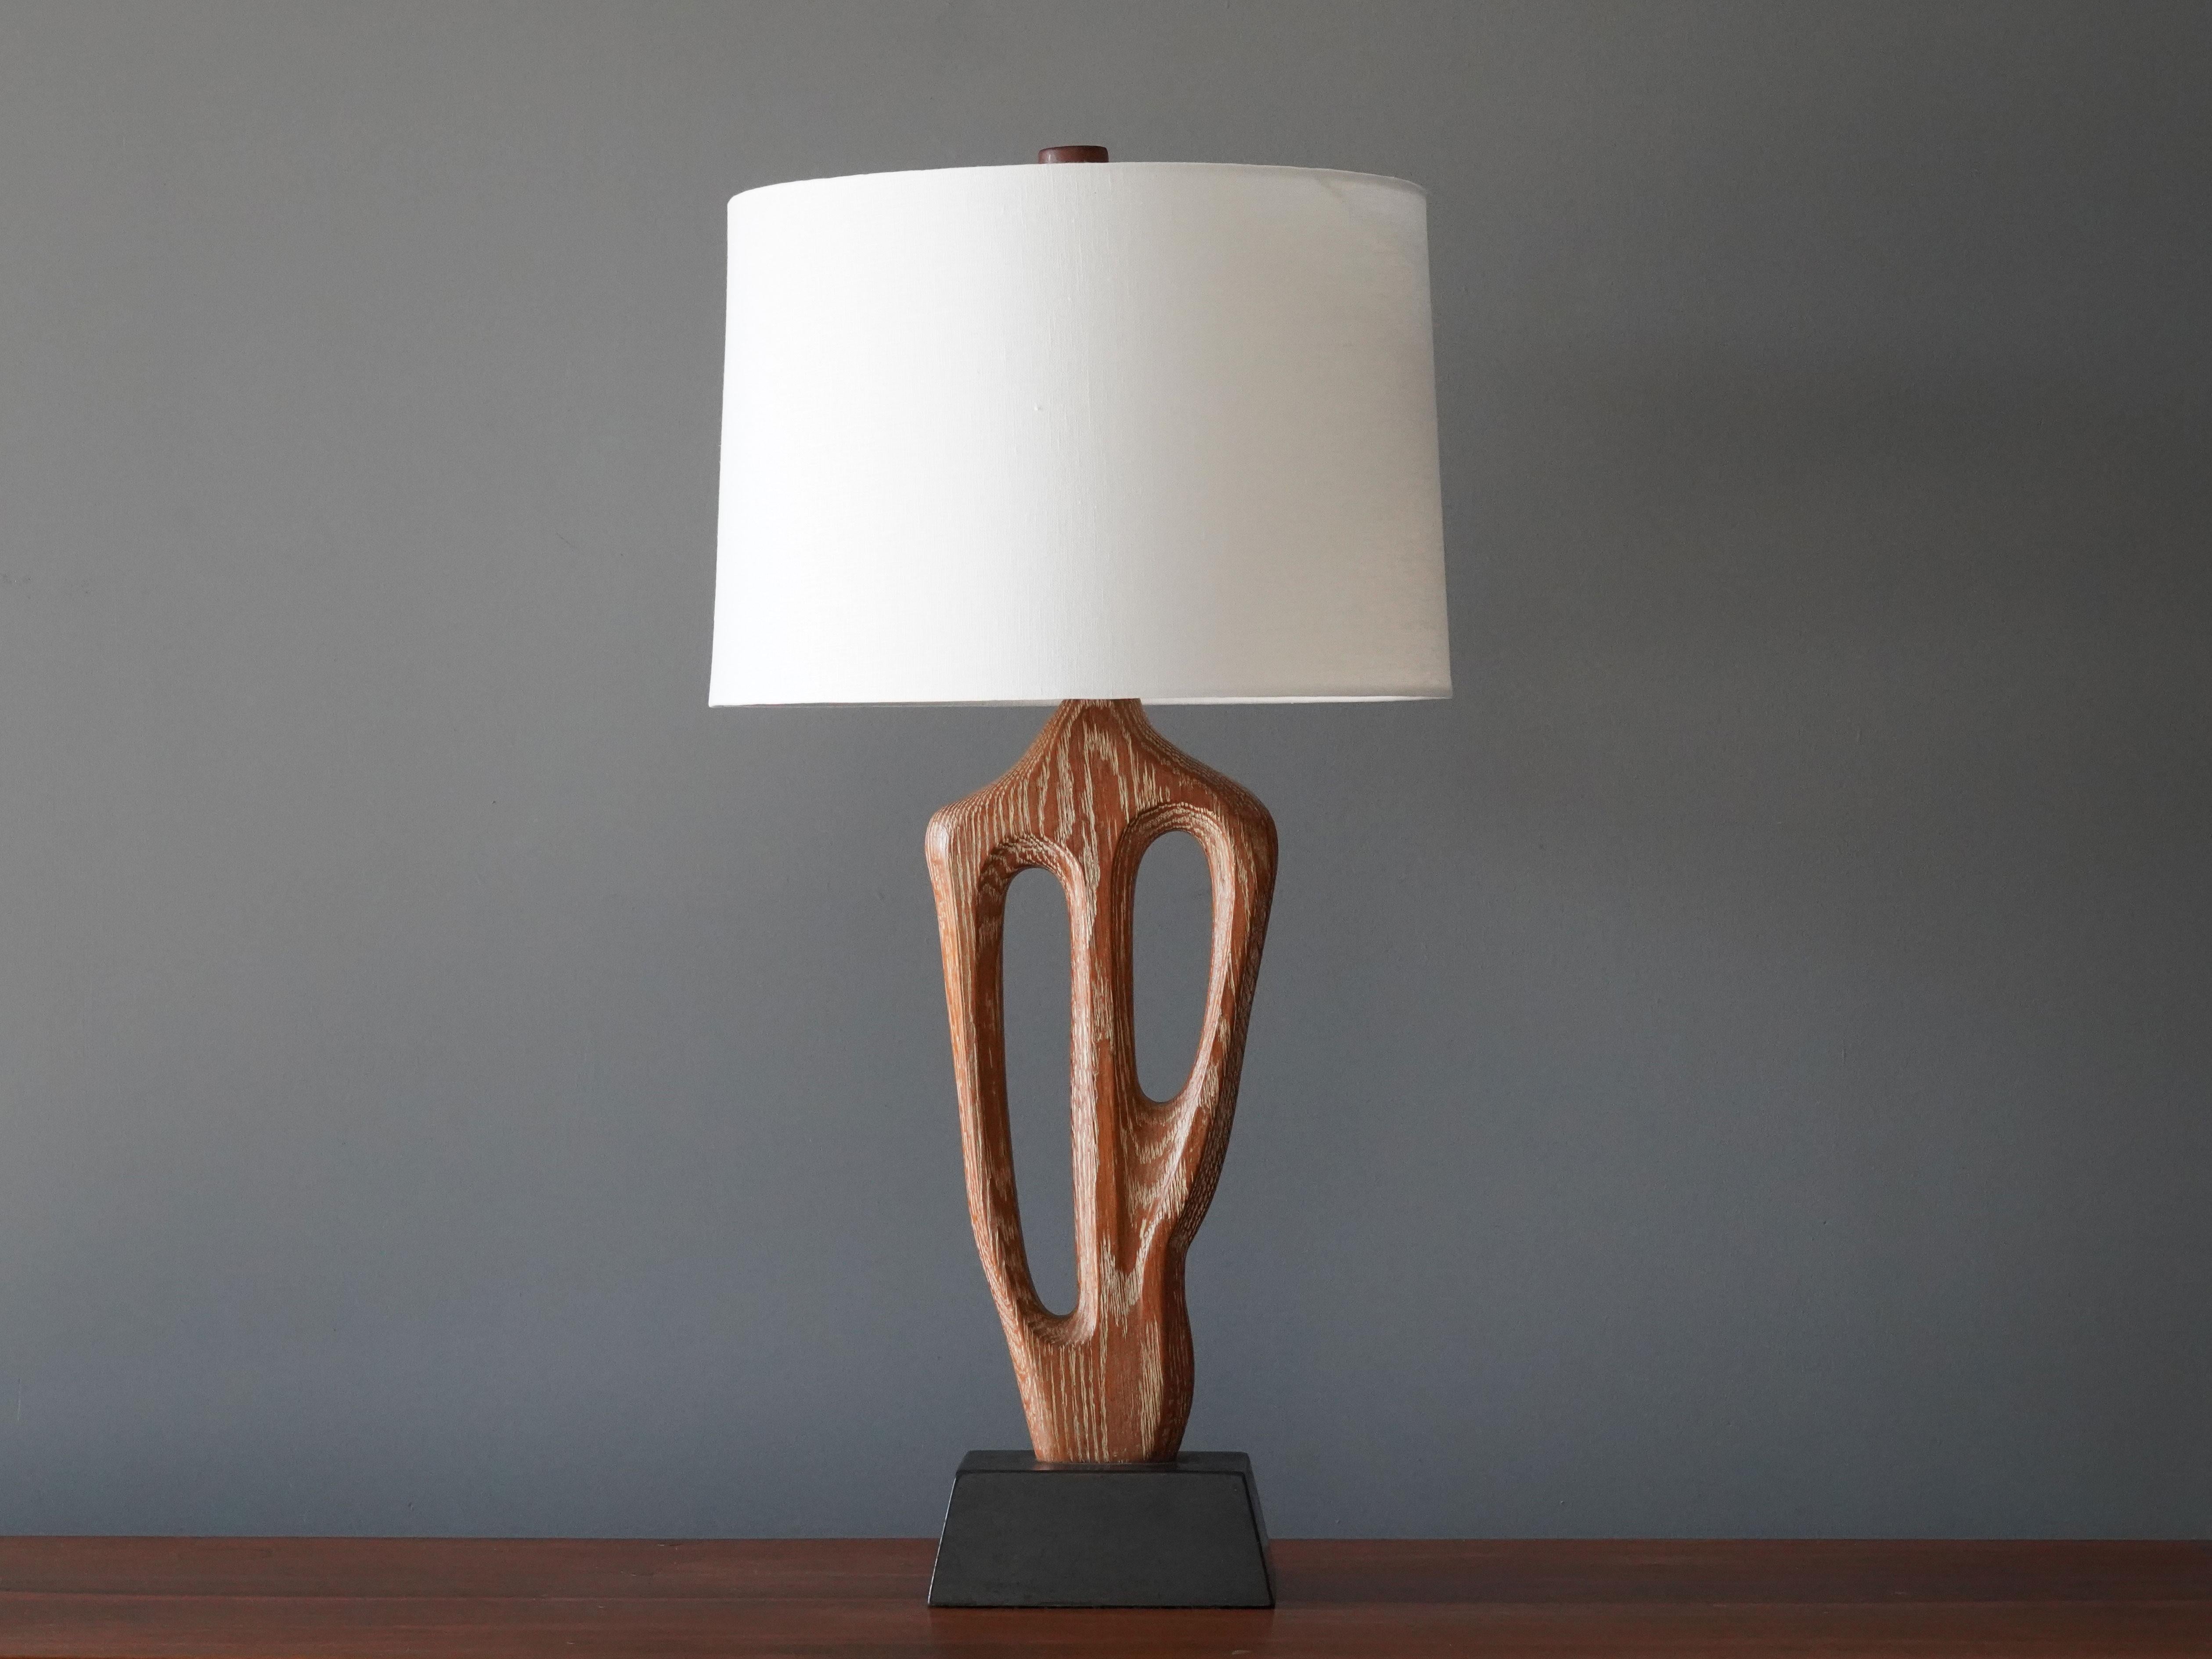 A rare organic / biomorphic table / desk lamp. Designed and produced by Yasha Heifetz, America, 1950s. Features a sculptural rod in perused oak on a black-painted wooden base. Signed on the base. Sold without lampshade. 

Other designers of the